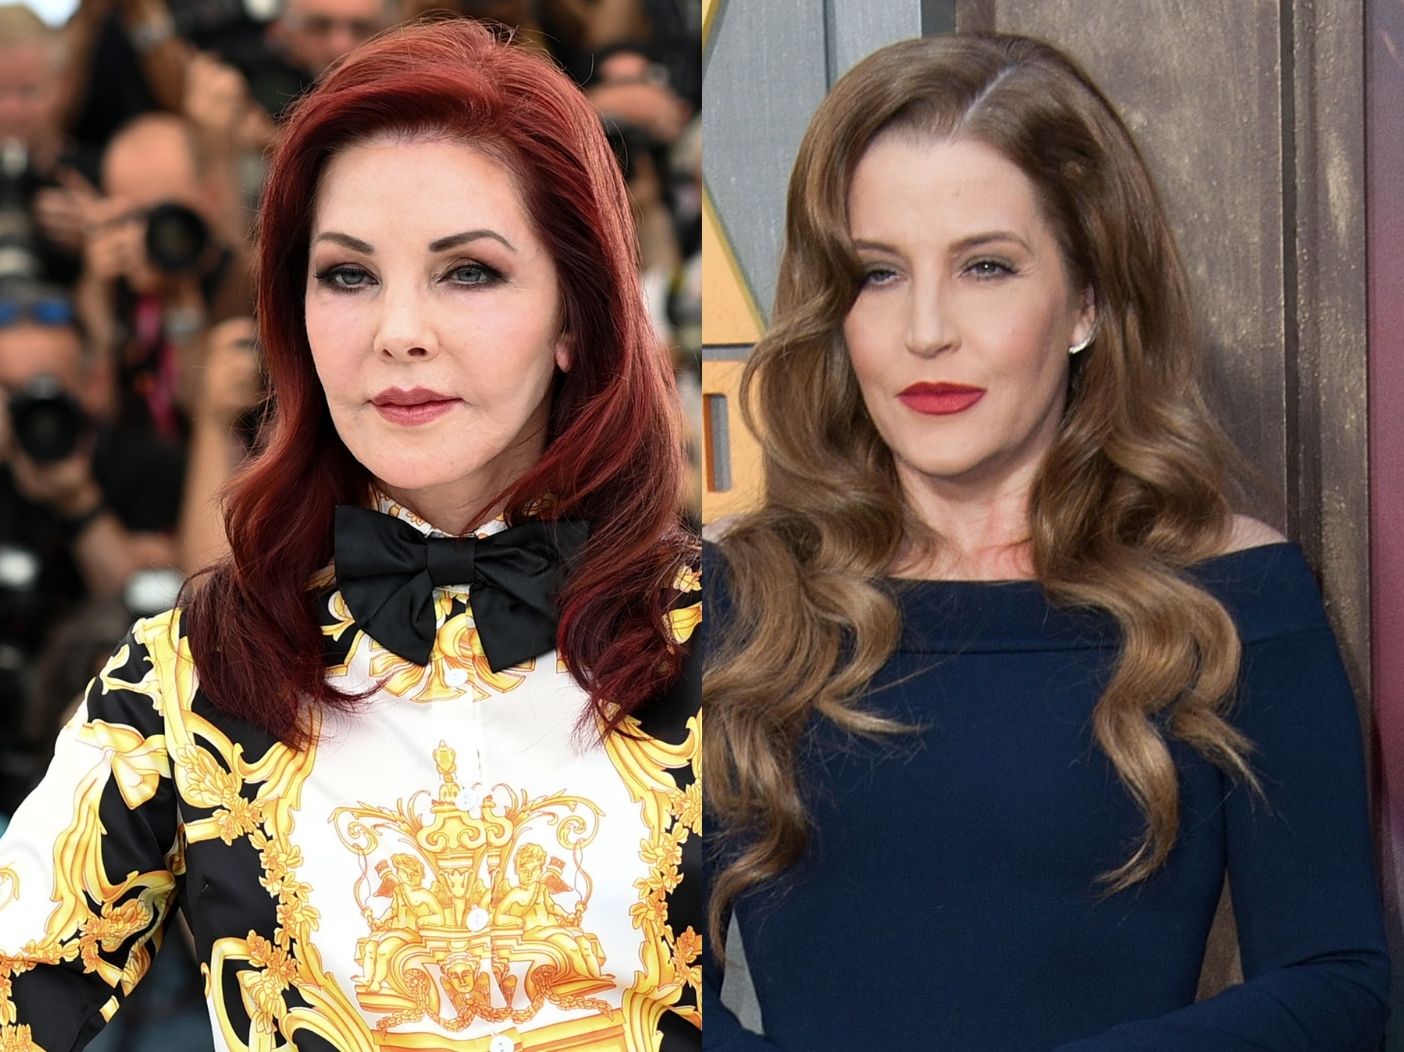 Tabloid Gossip Claim Lisa Marie Presley Supposedly Fighting with Mom Priscilla over Austin Butler